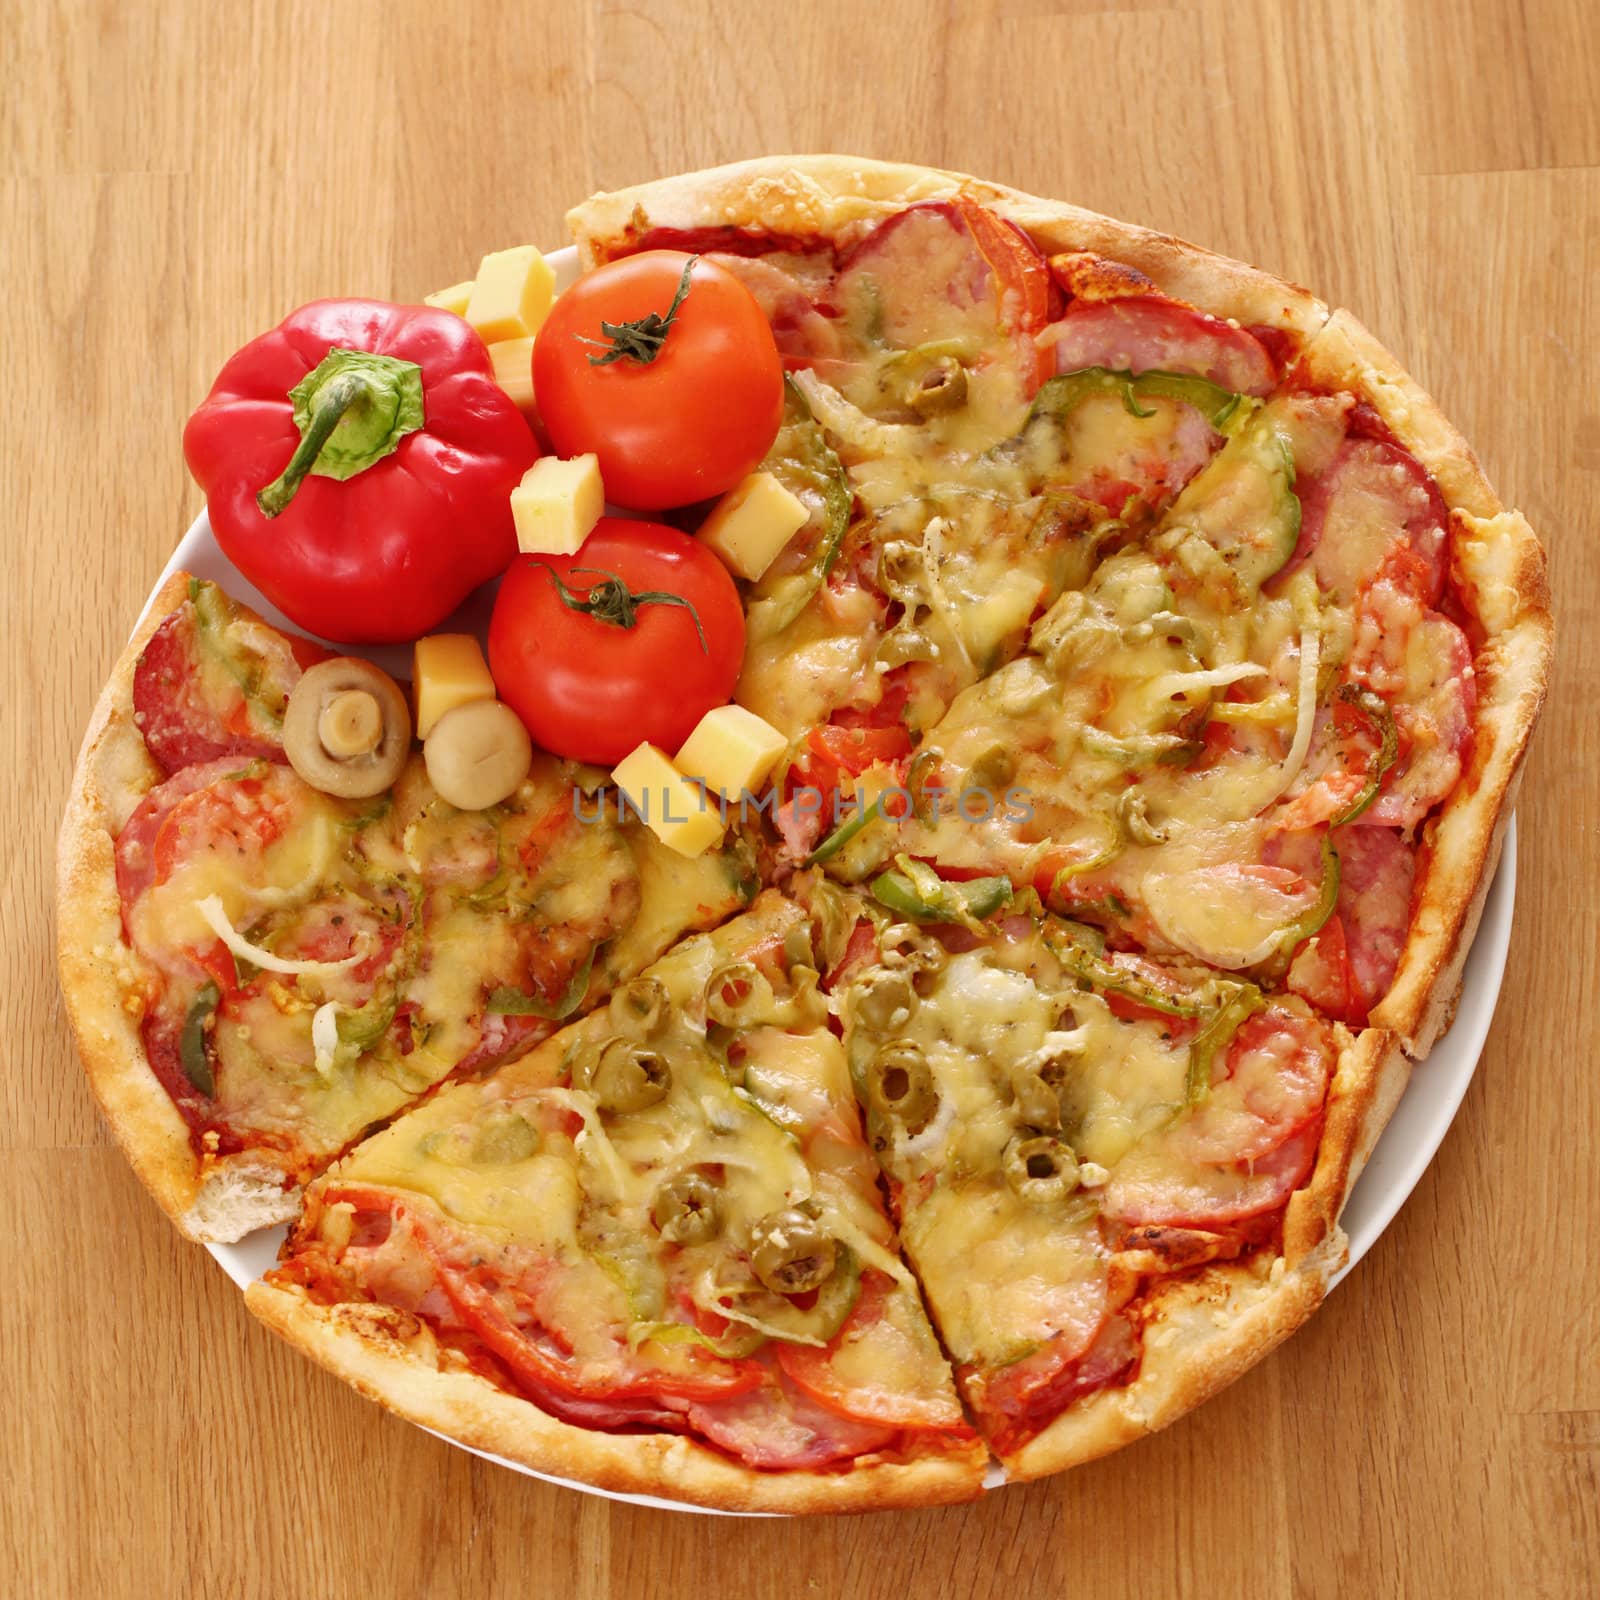 Fresh italian pizza in plate on a wooden surface